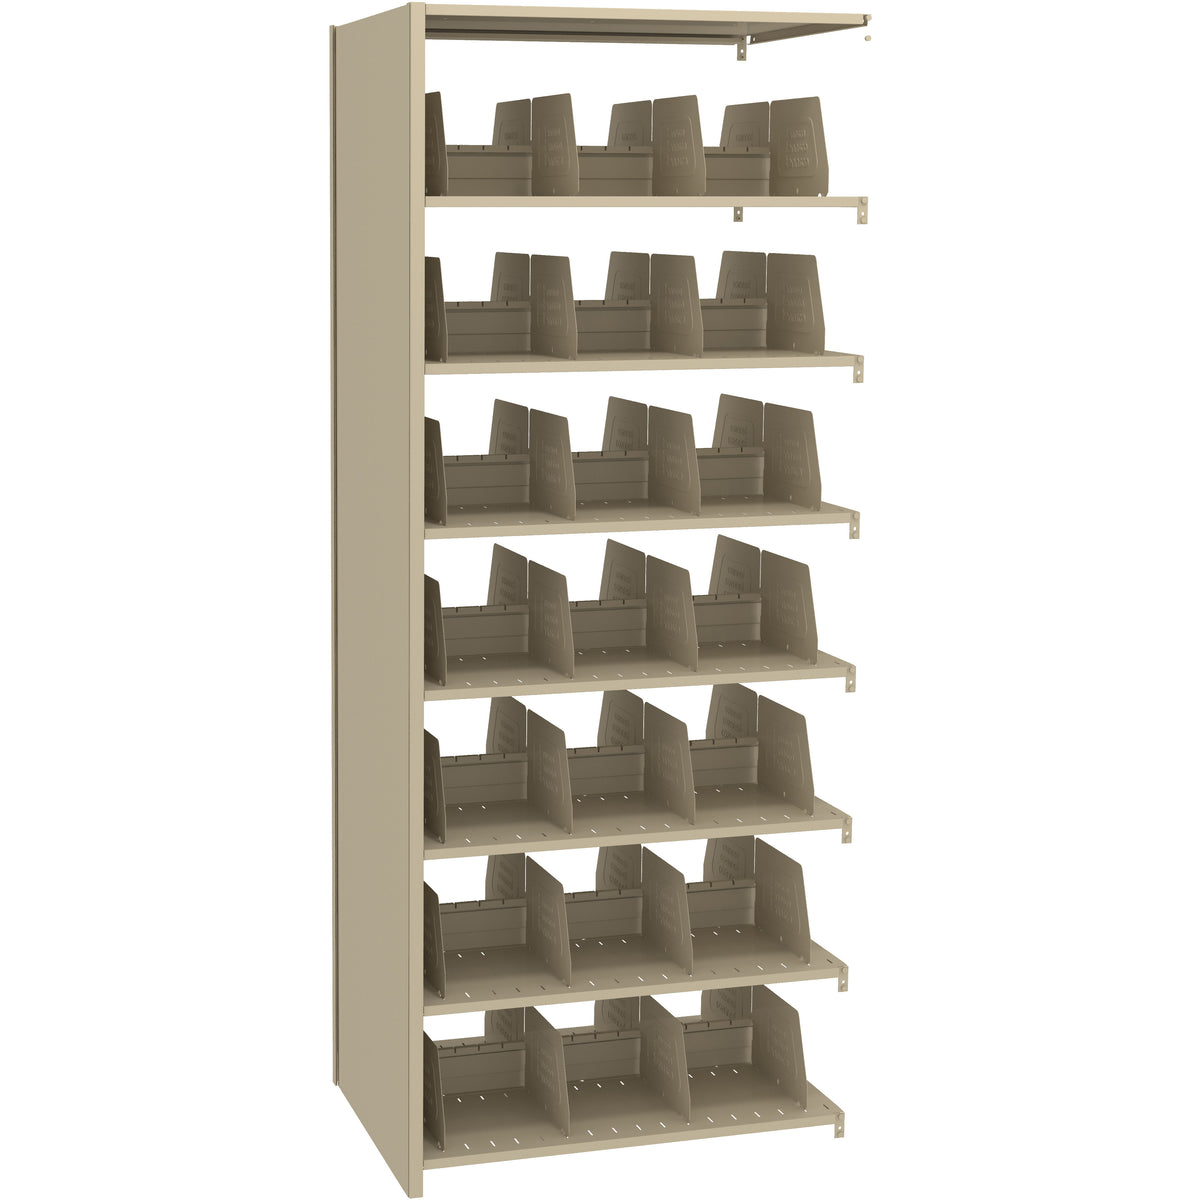 Tennsco 88" High Double Entry Imperial Shelving Adder Unit - 14 Openings, 2488AC